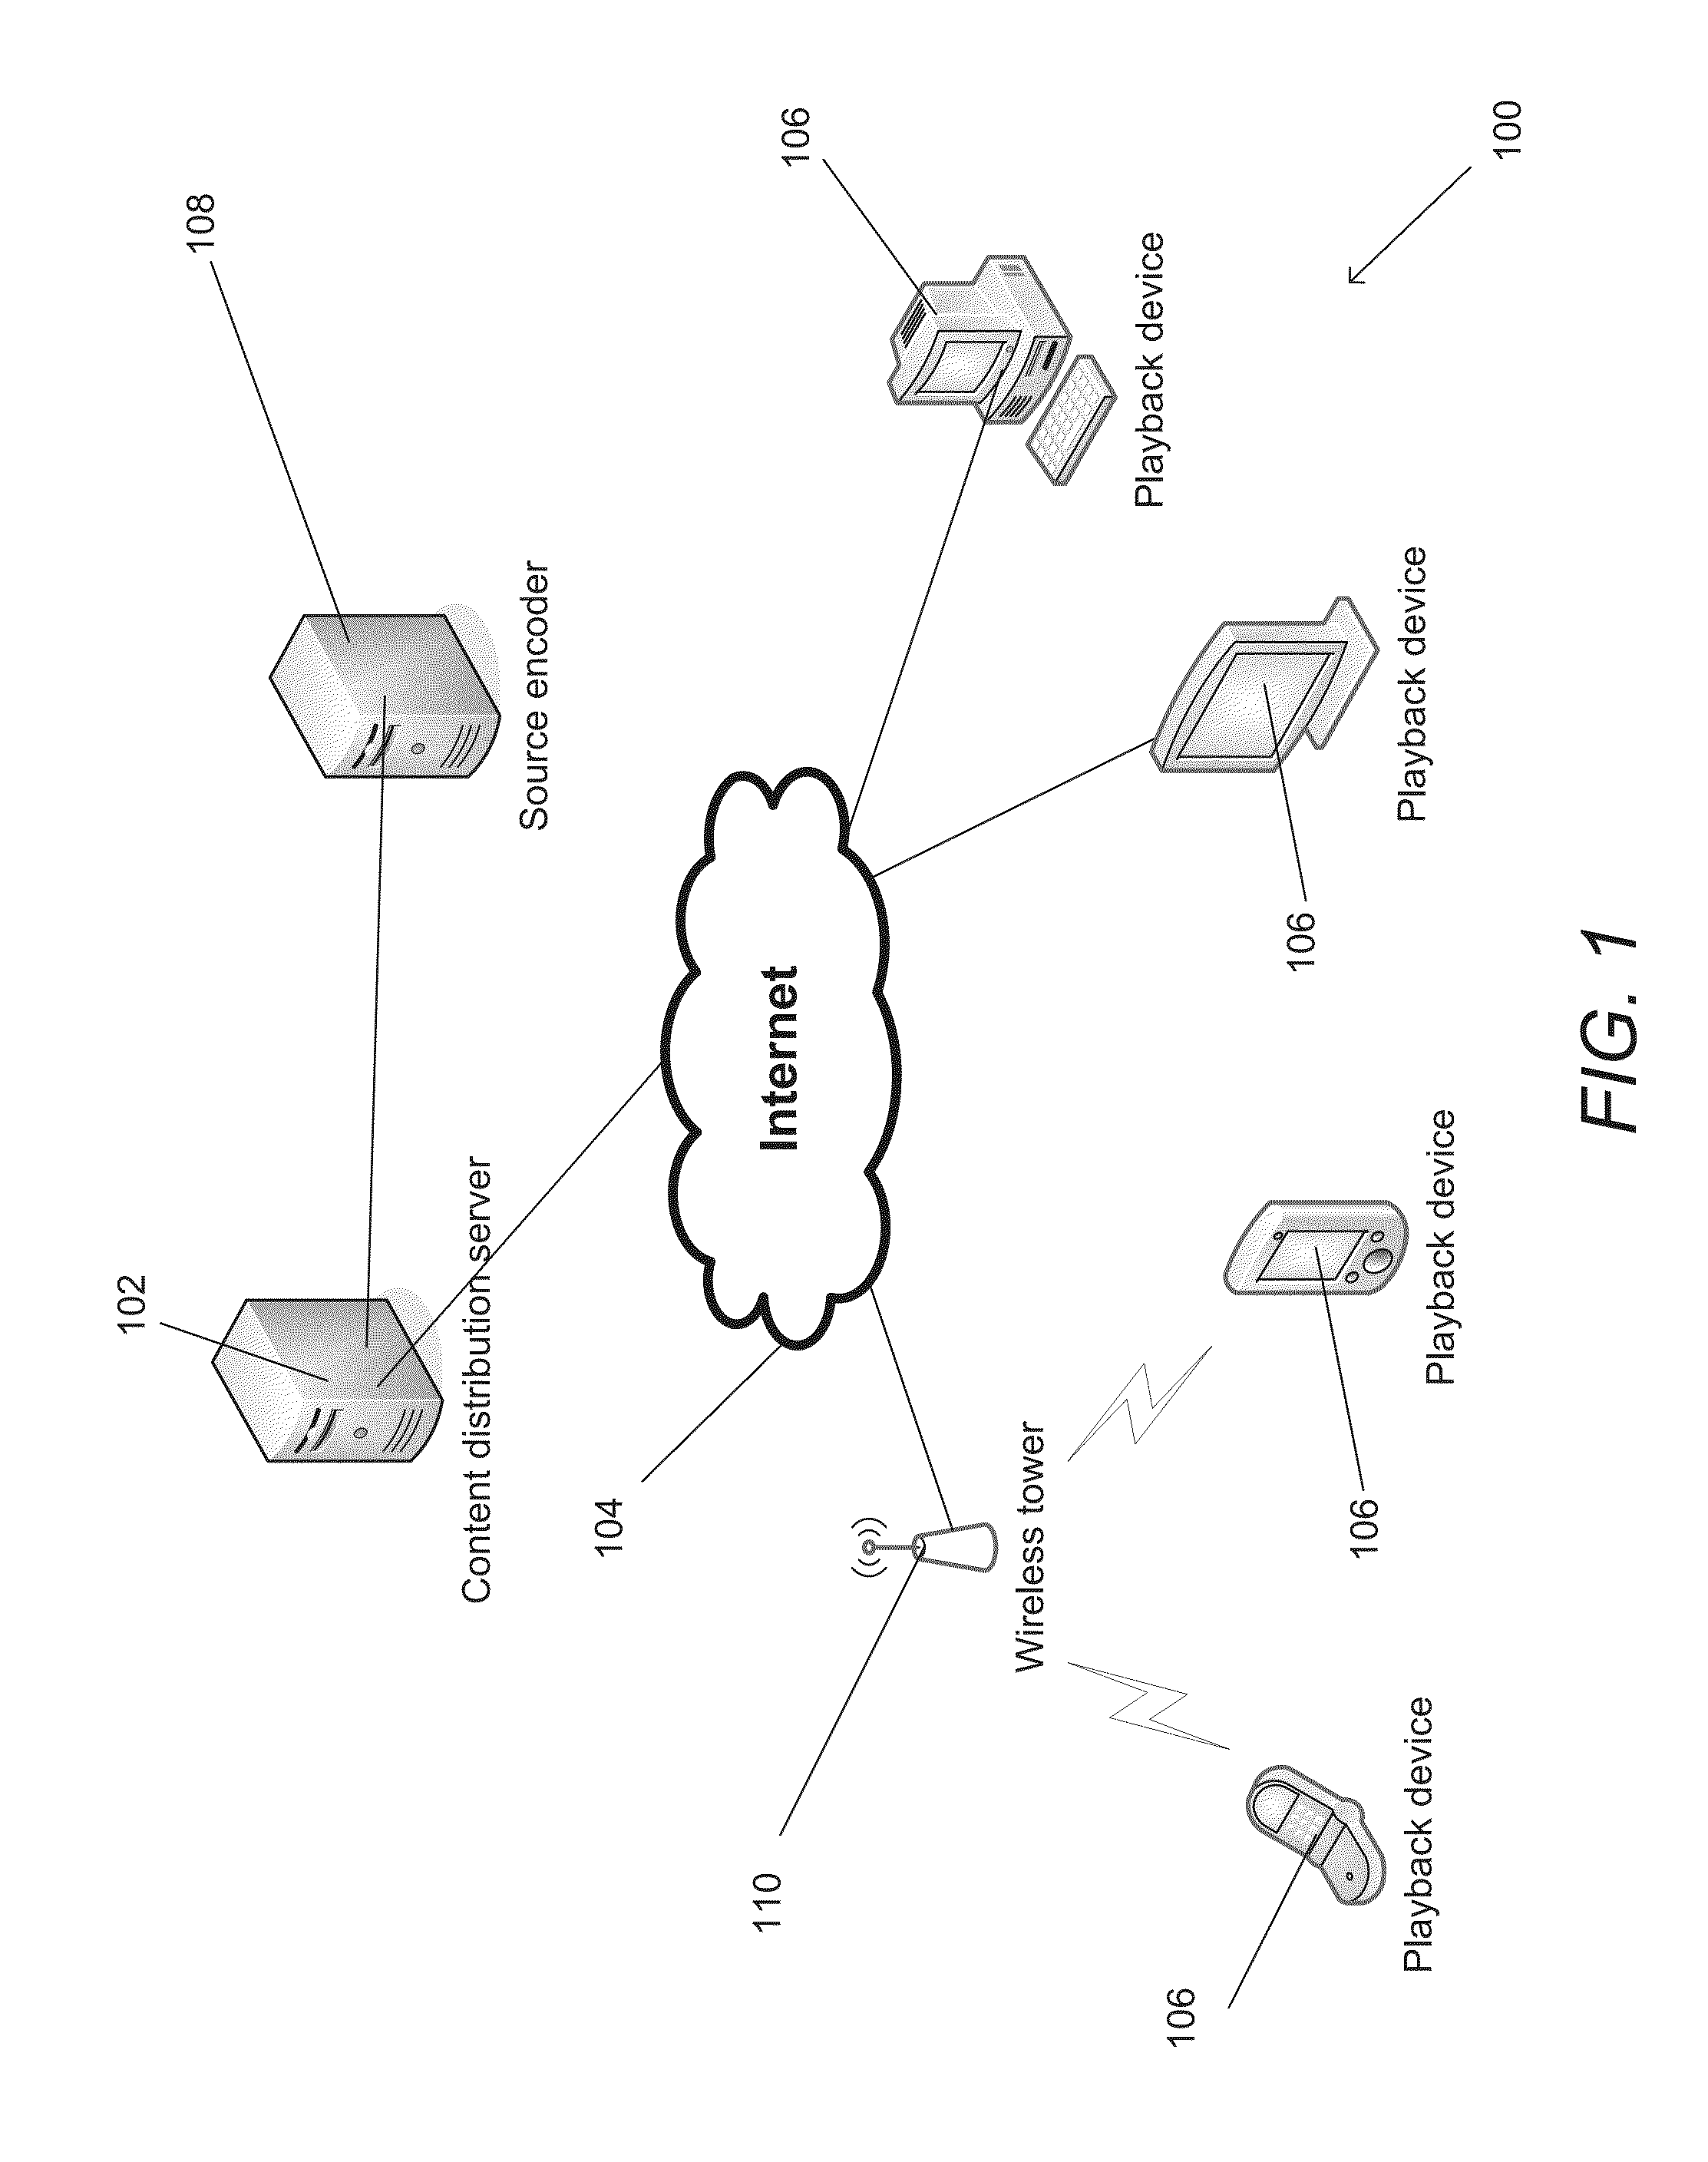 Systems and methods for adaptively applying a deblocking filter